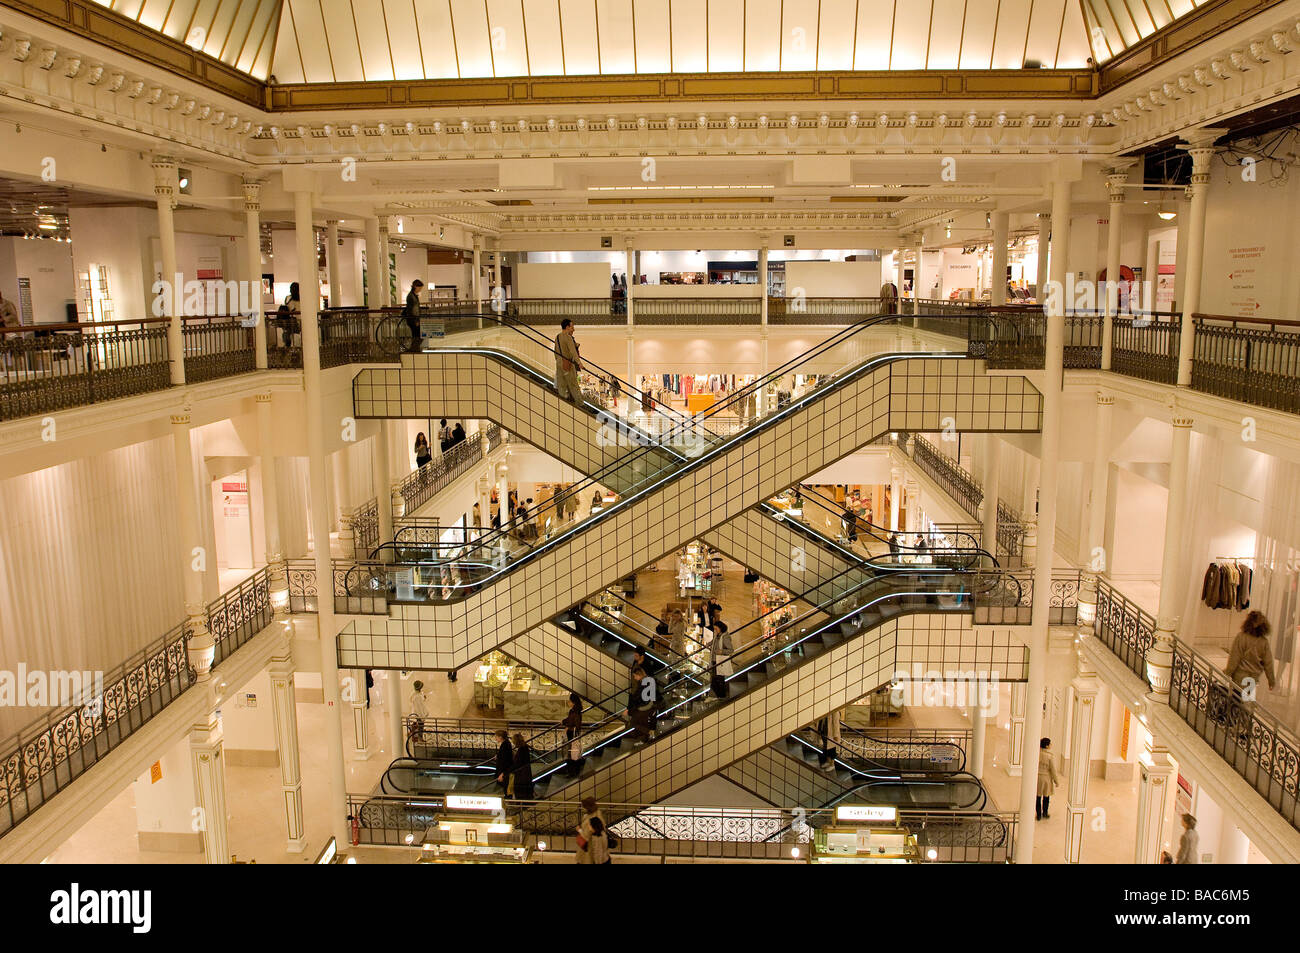 Ceiling Of Le Bon Marche Department Store - Paris, France Stock Photo,  Picture and Royalty Free Image. Image 116311864.